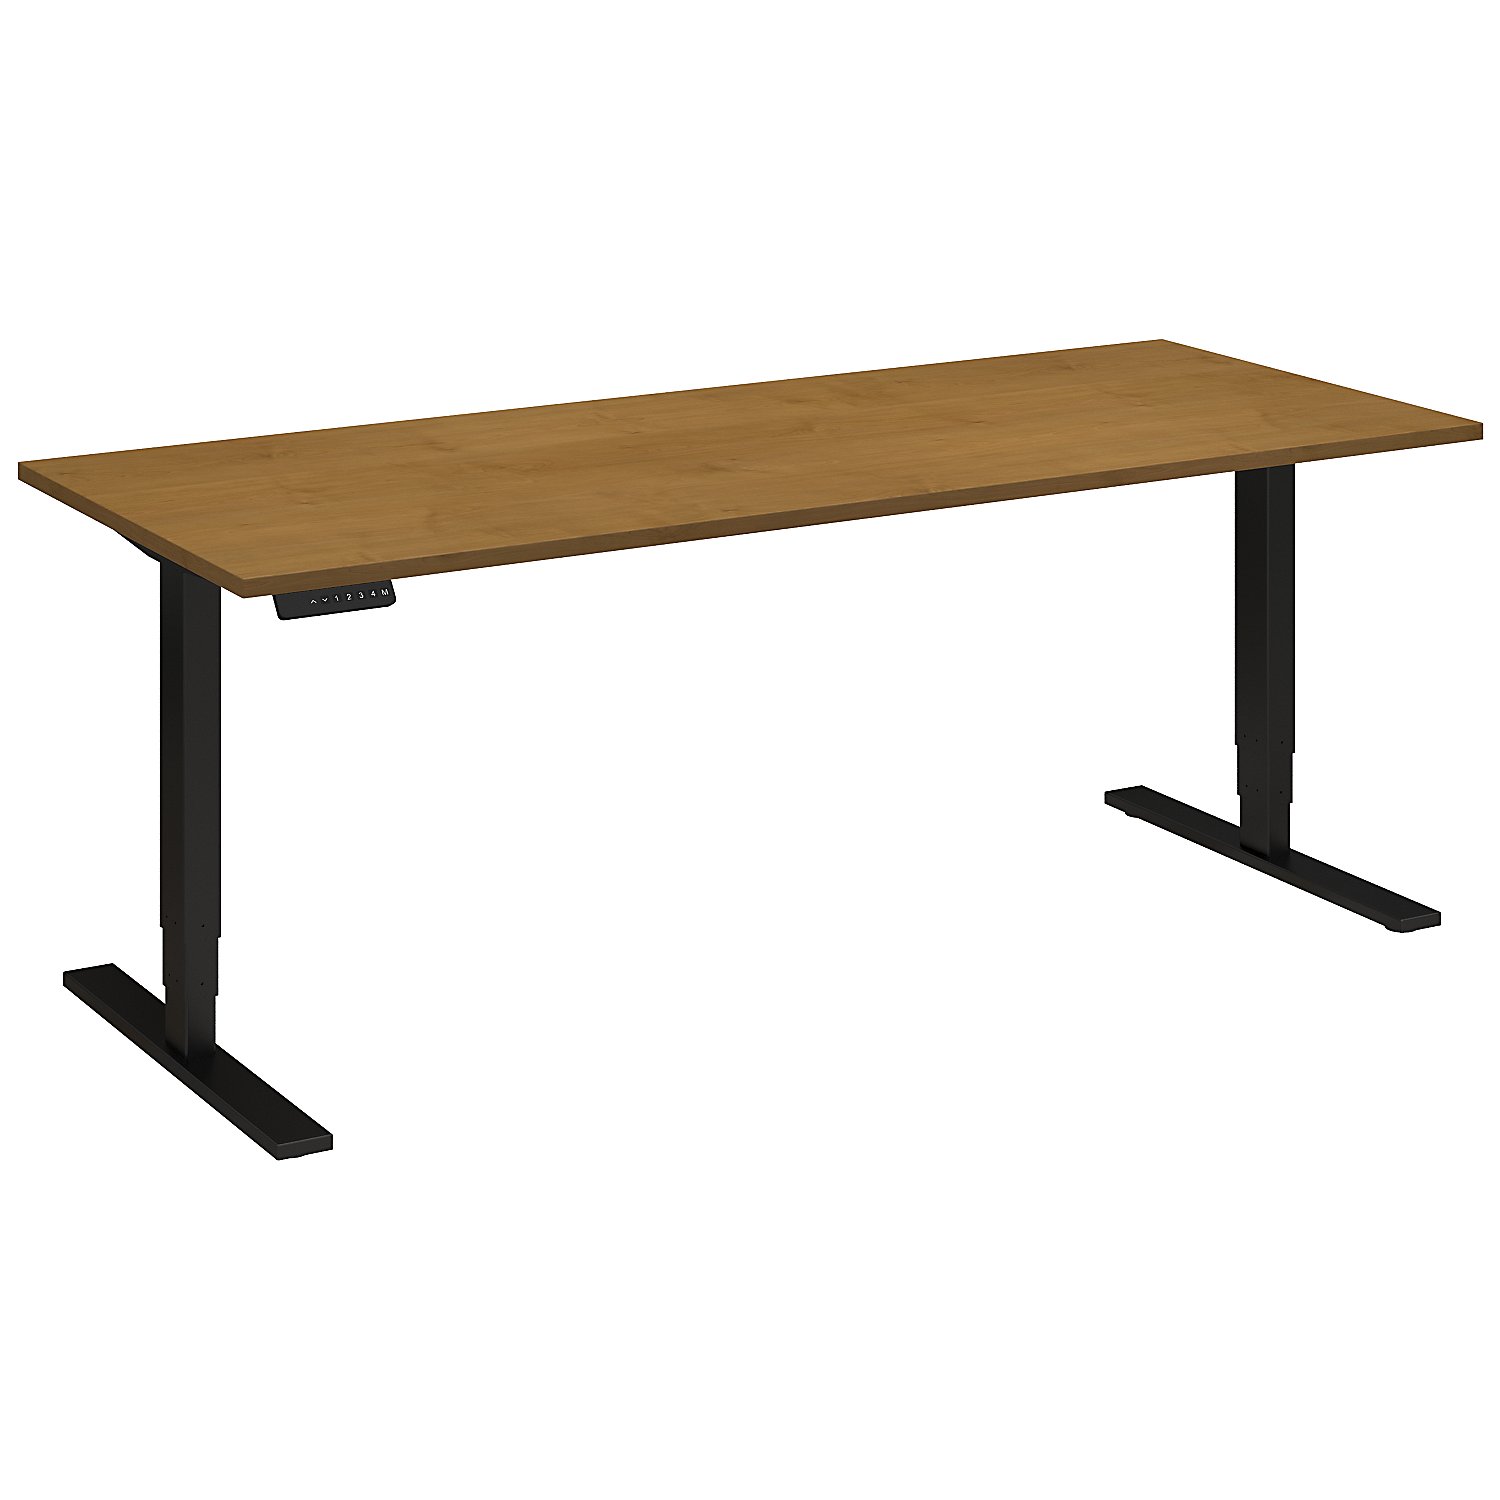 Adjustable Height Desks from BBF - Shown in Natural Cherry woodgrain laminate top and black base